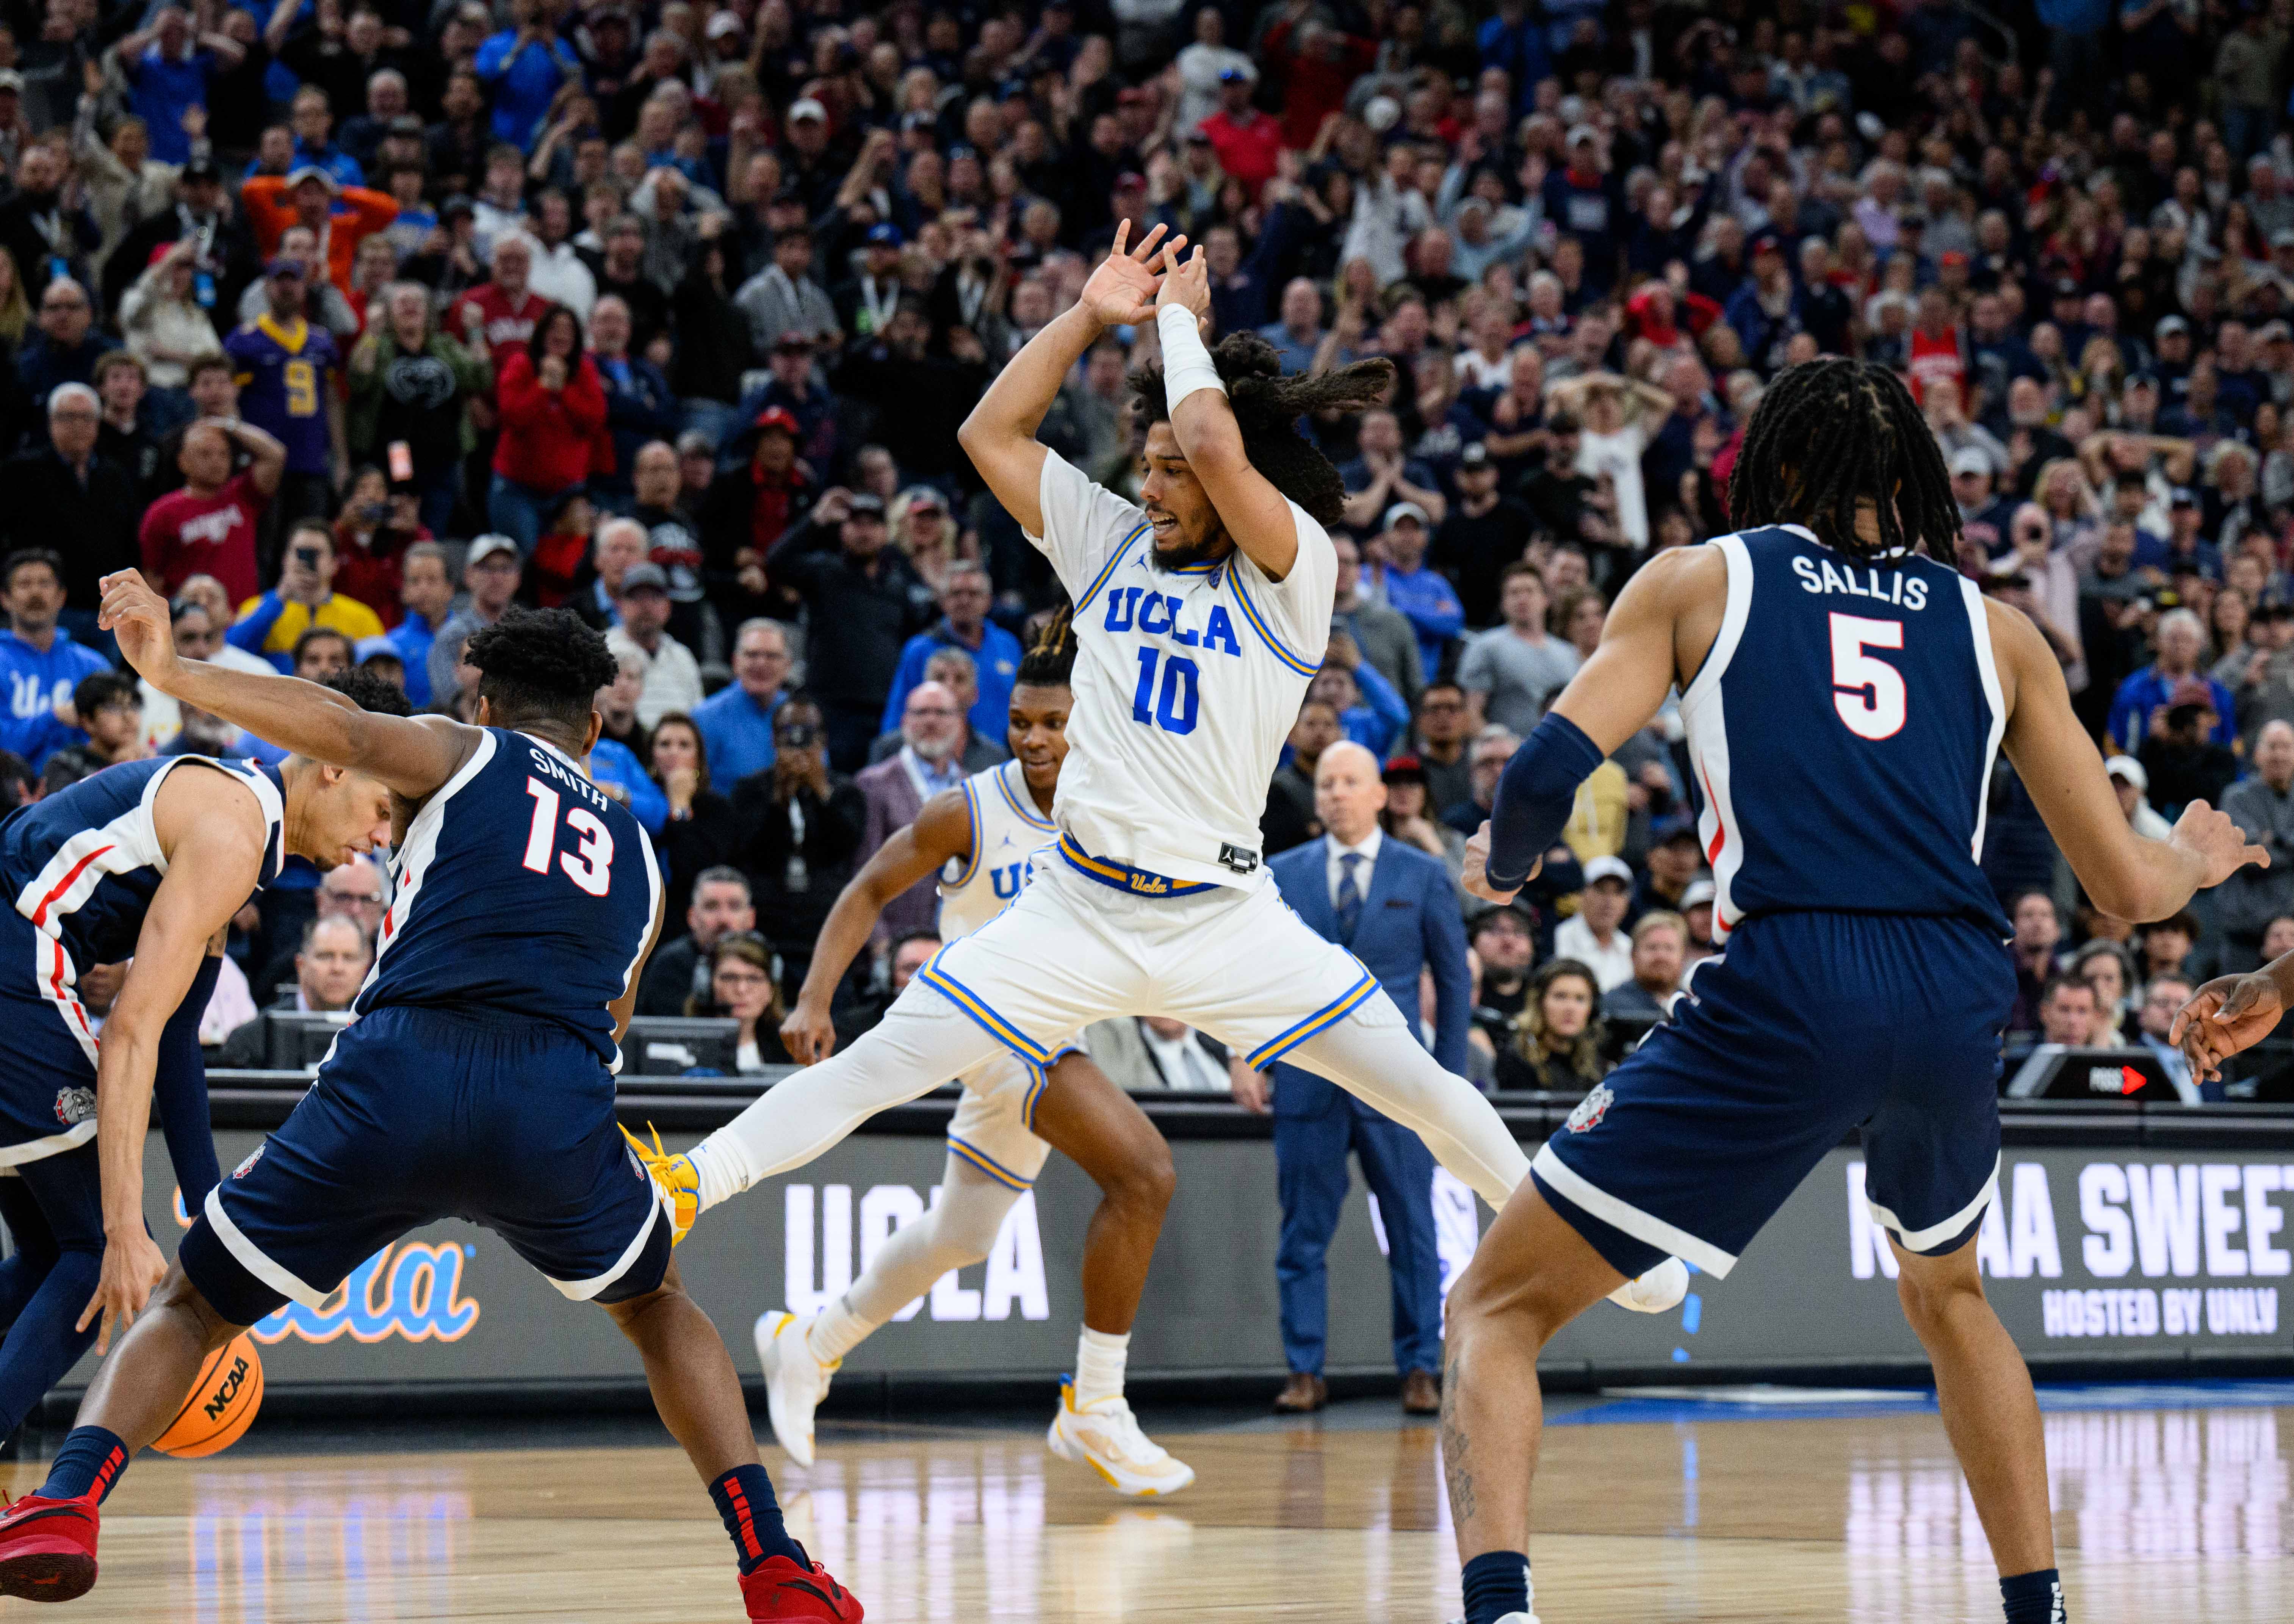 Potential NBA draft picks abound in UCLA men's basketball's 2018